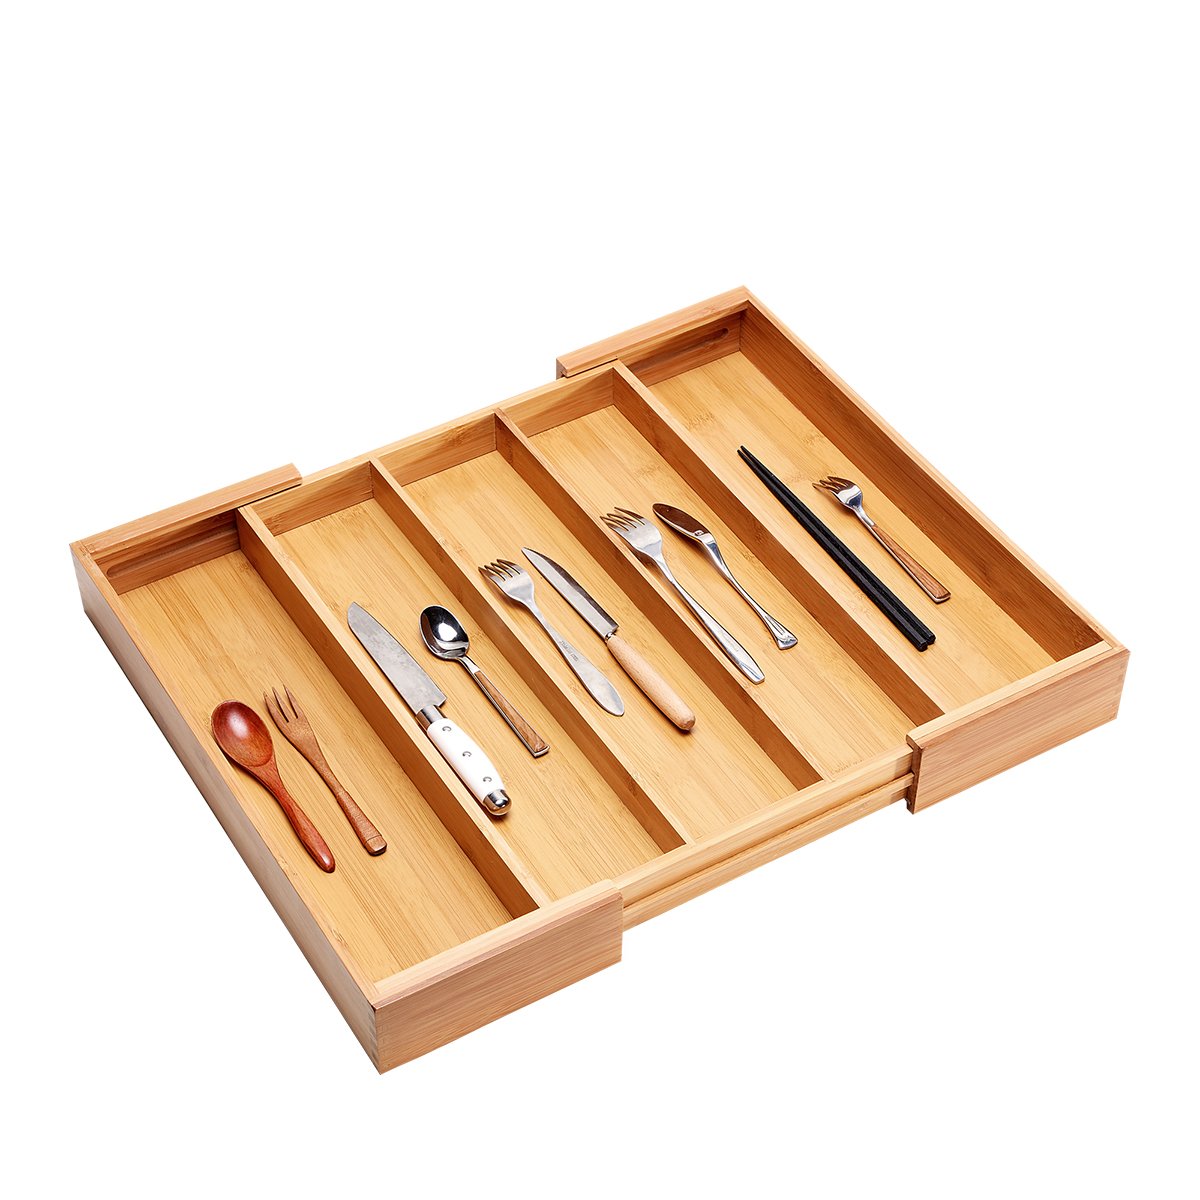 Bamboo Expandable Utensil Cutlery Tray Drawer Organizer Divider 3 Compartments with 2 Adjustable Dimensions;Beautiful Durable and Multifunctional Utensil Holder and Organizer